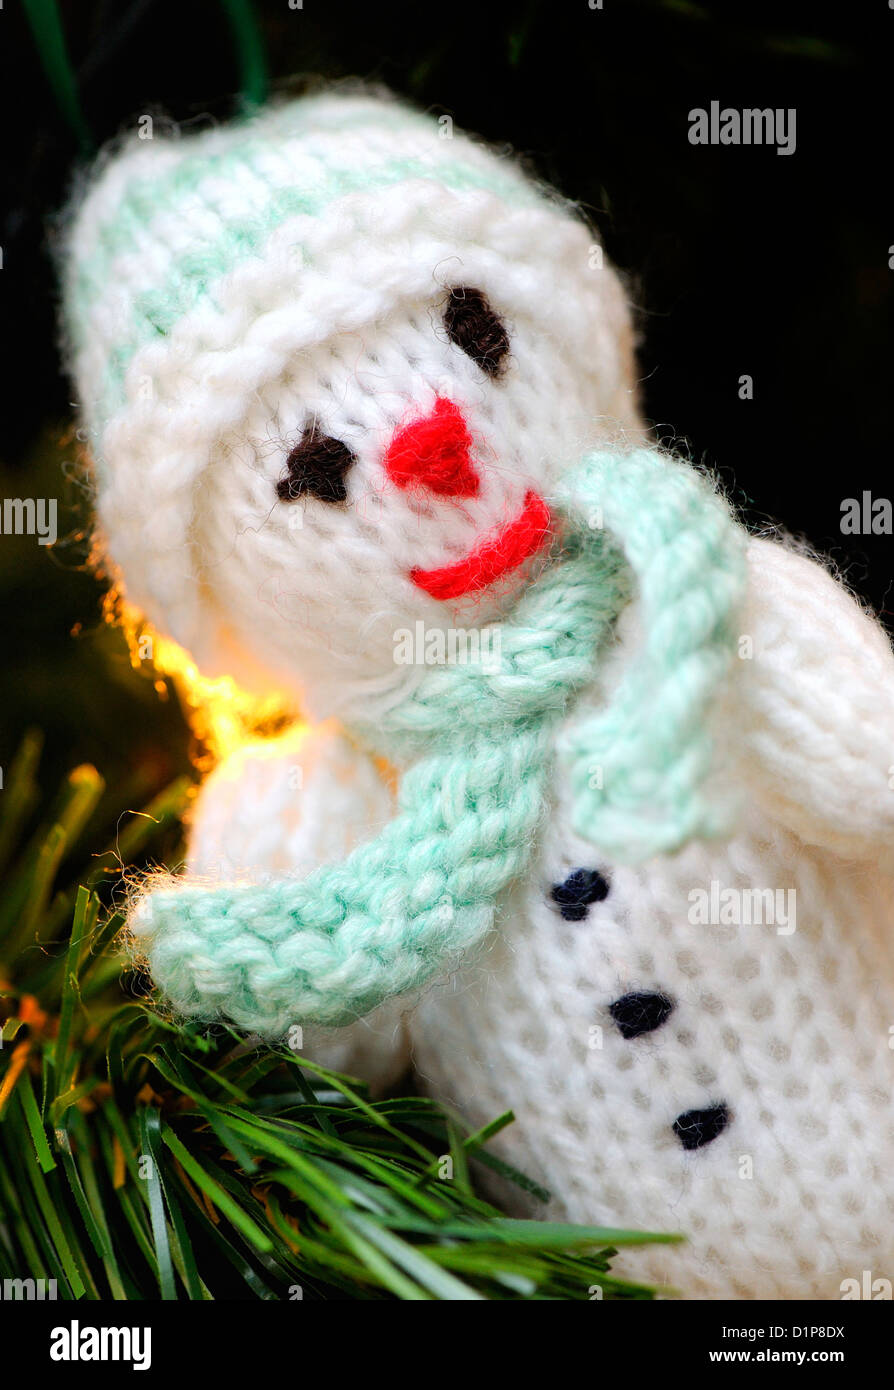 White knitted snowman with a light green scarf and hat used as a Christmas decoration. Stock Photo